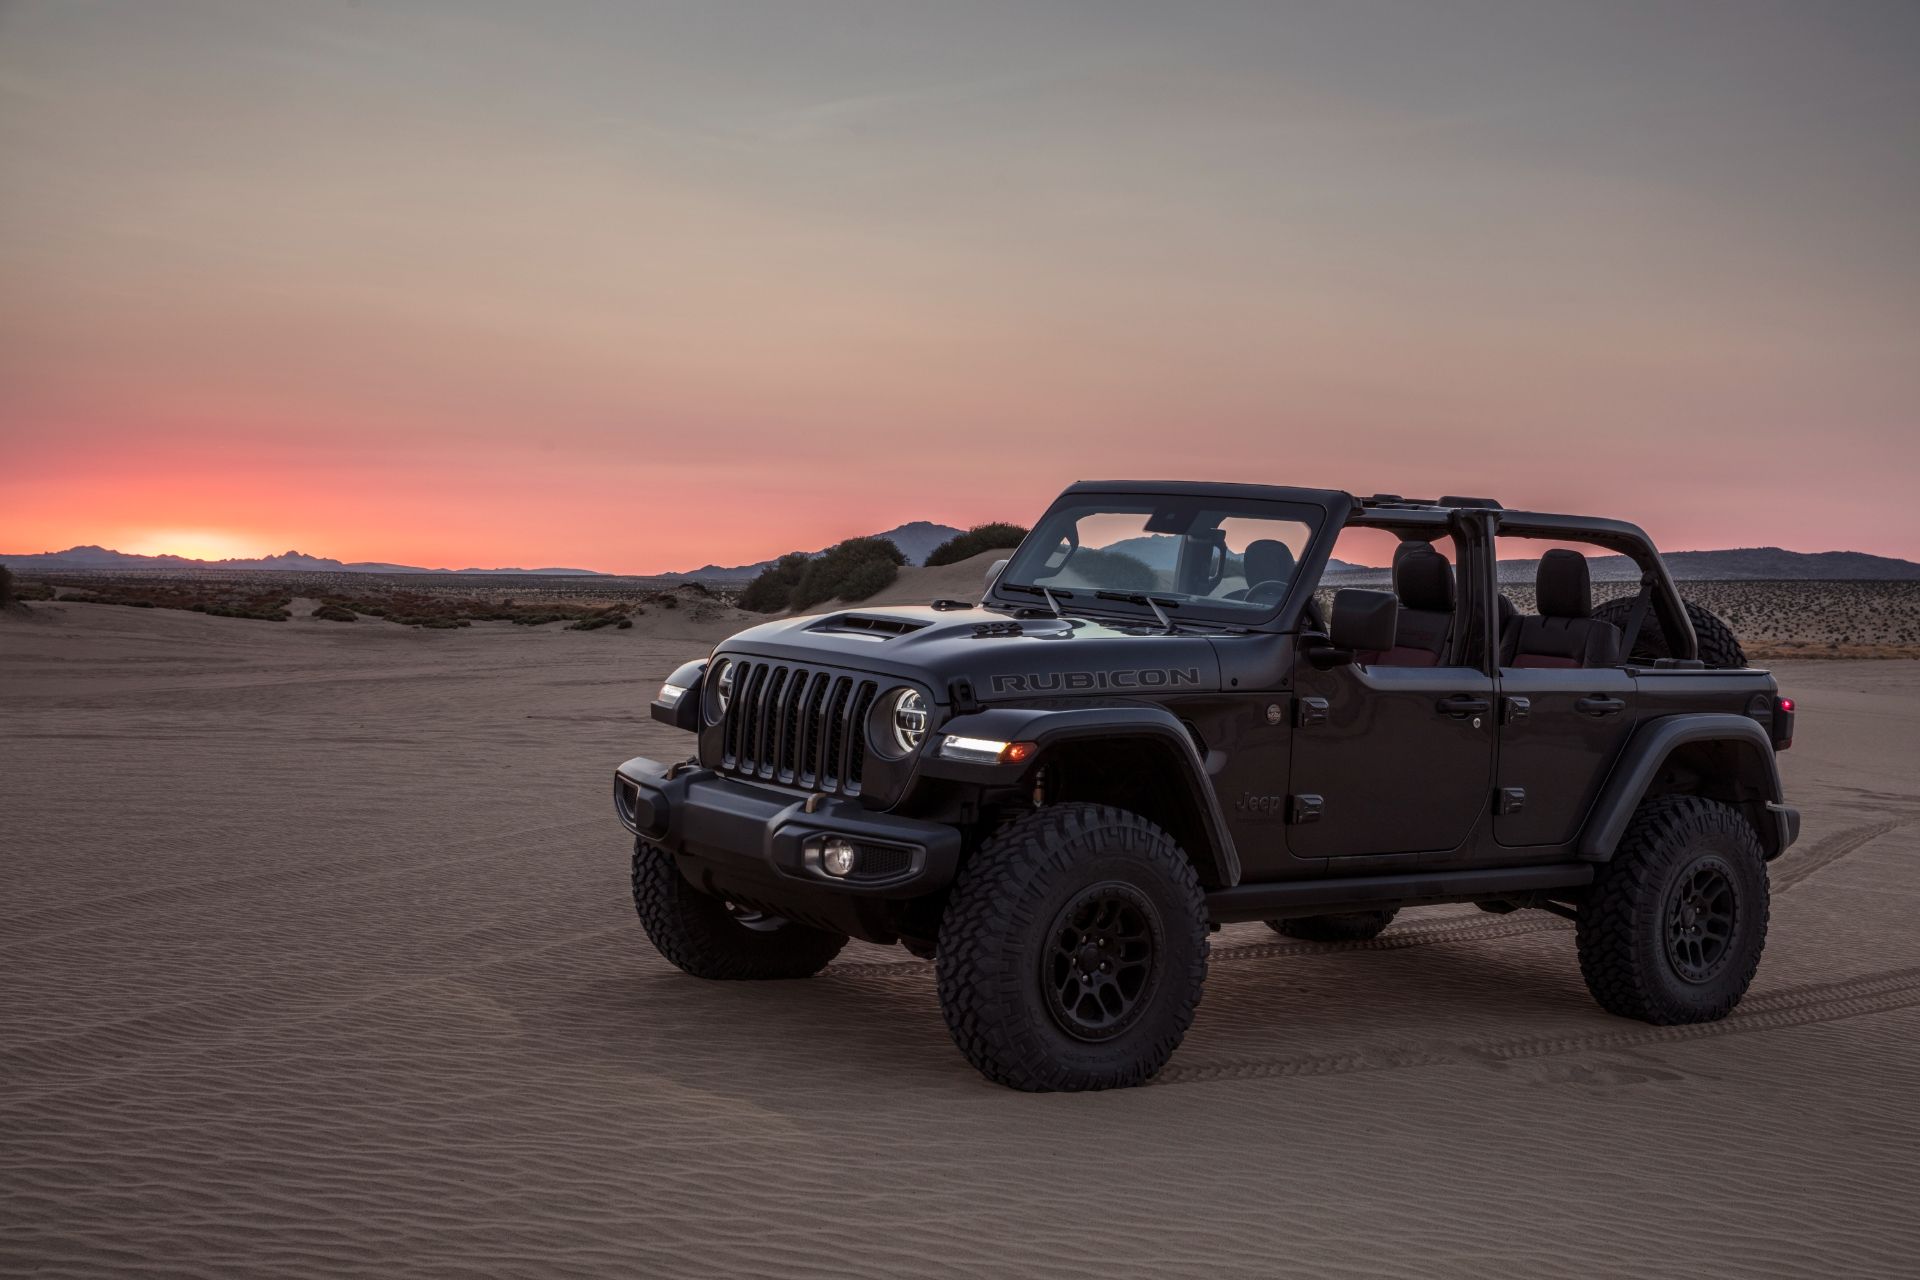 2021 Jeep Wrangler Rubicon 392: A 470-HP V8 Off-Roader With a Dual-Purpose  Hood Scoop